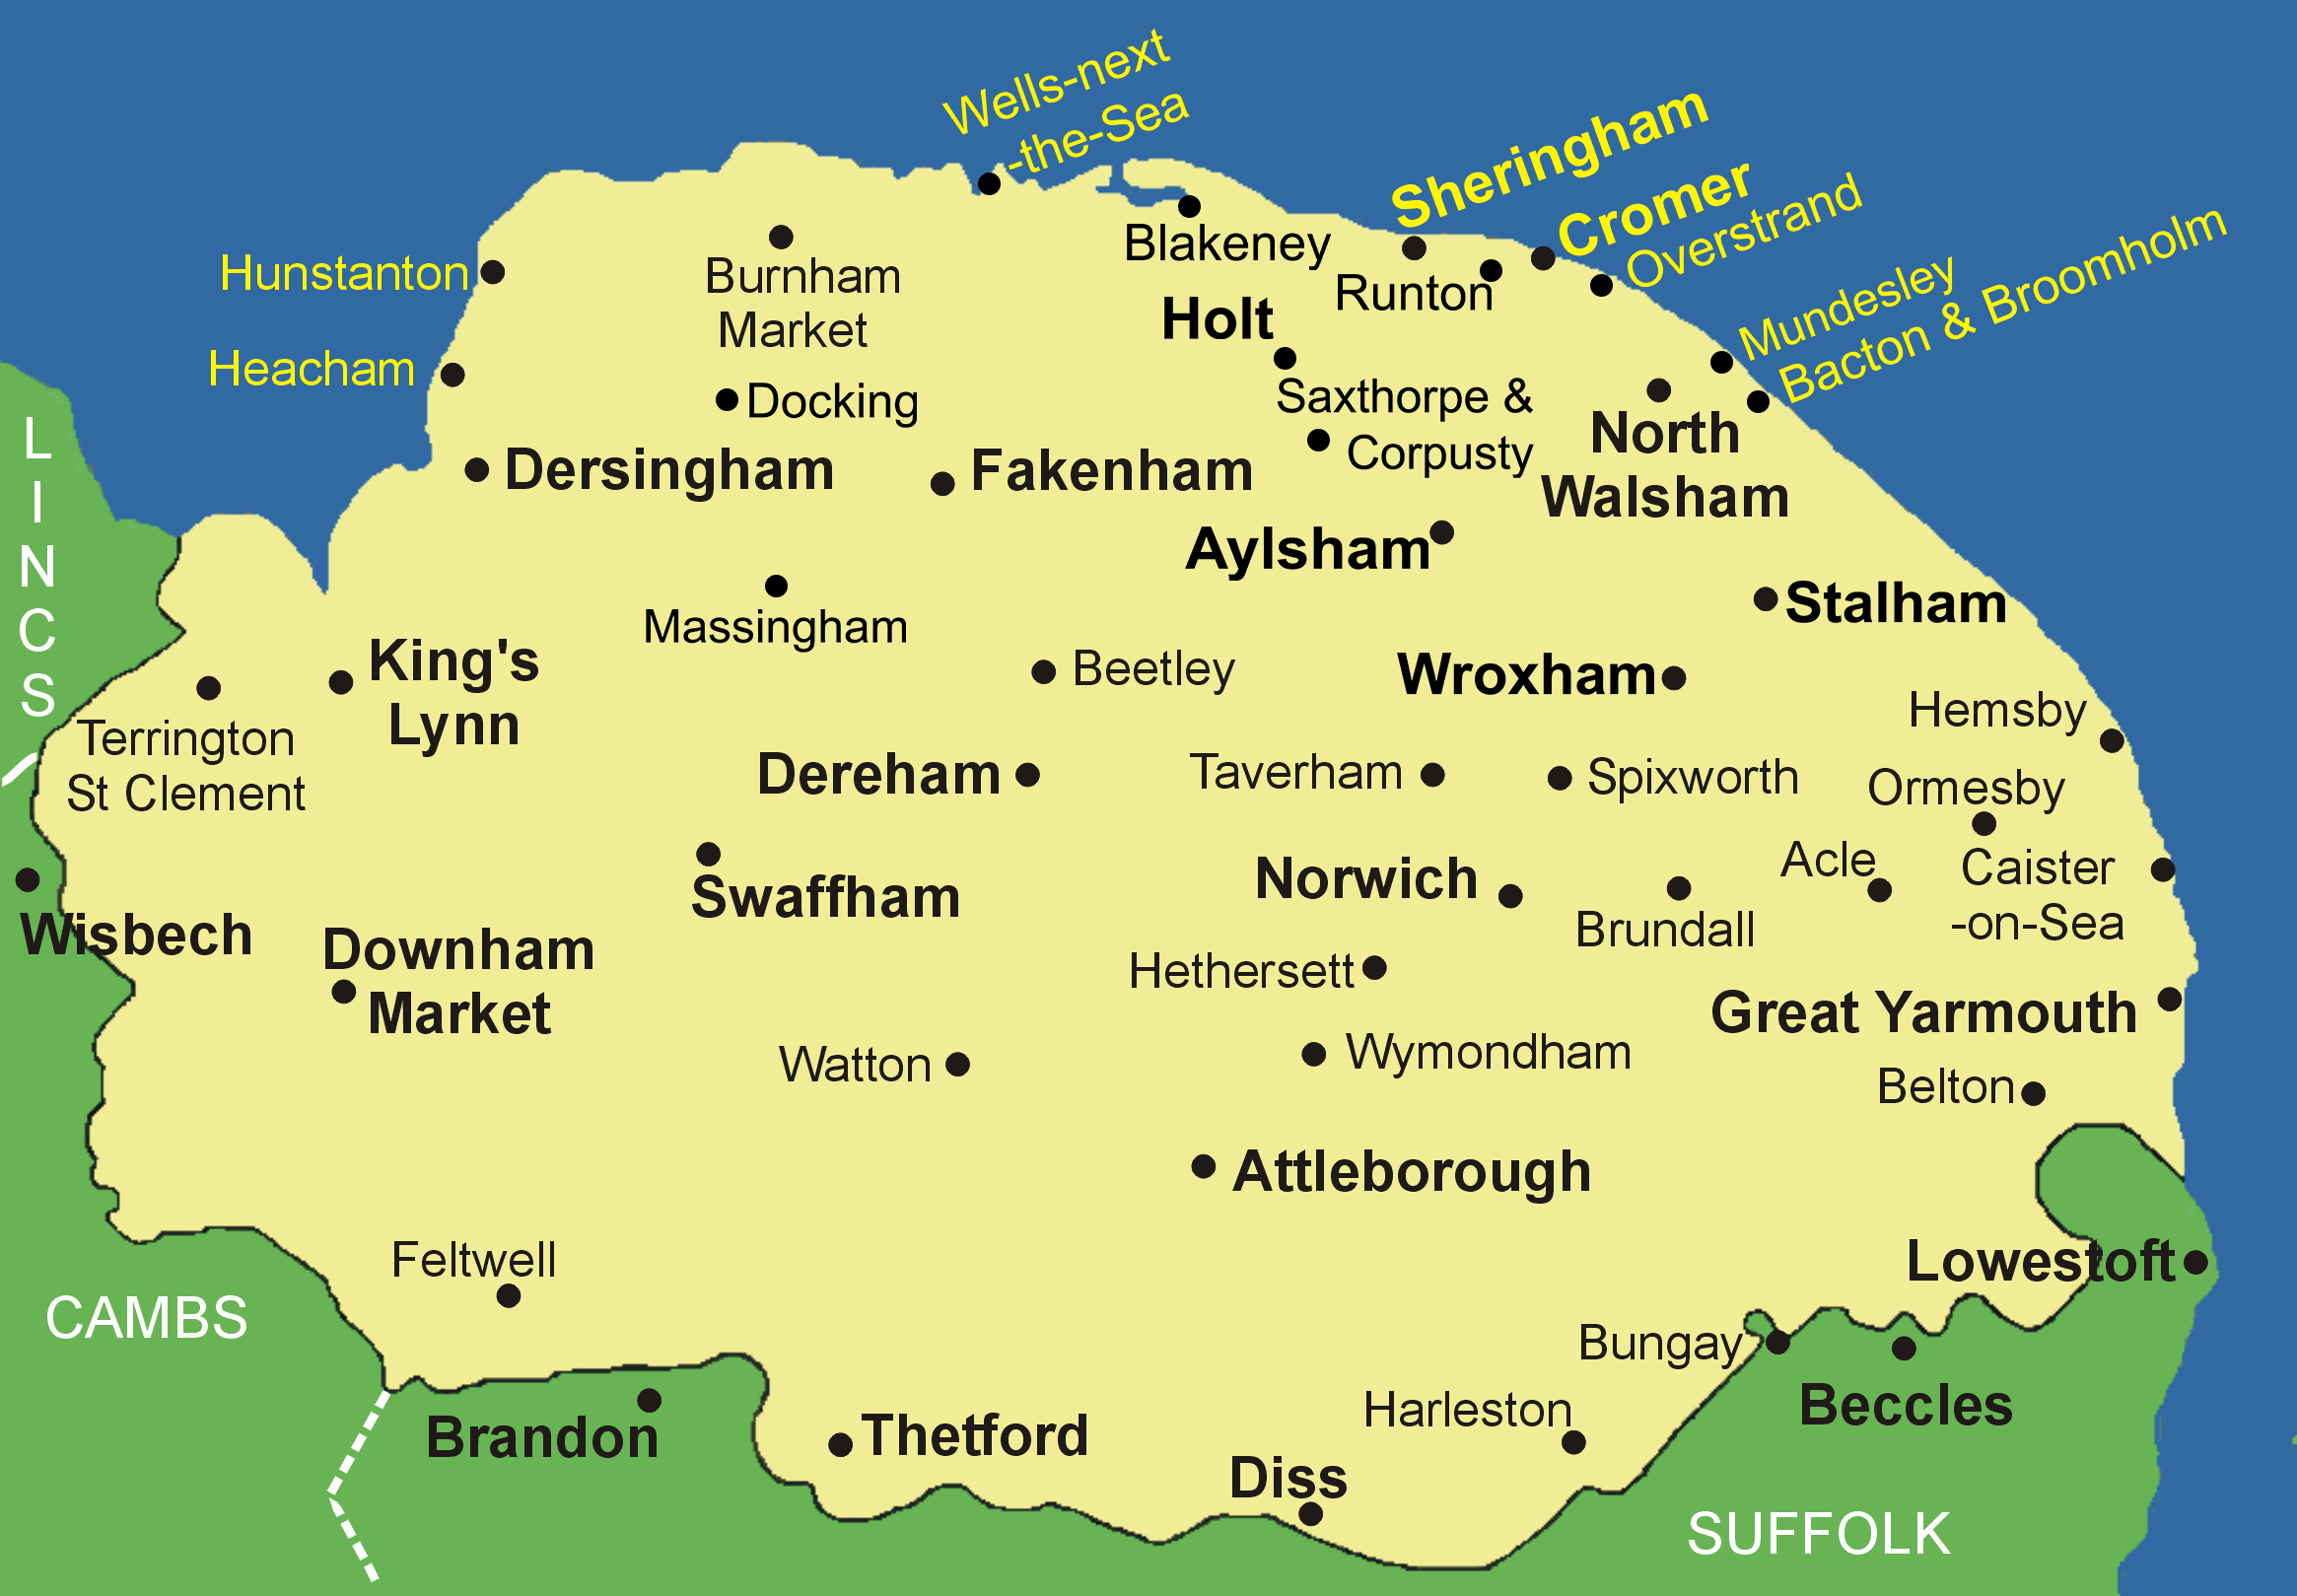 Clickable map of Norfolk